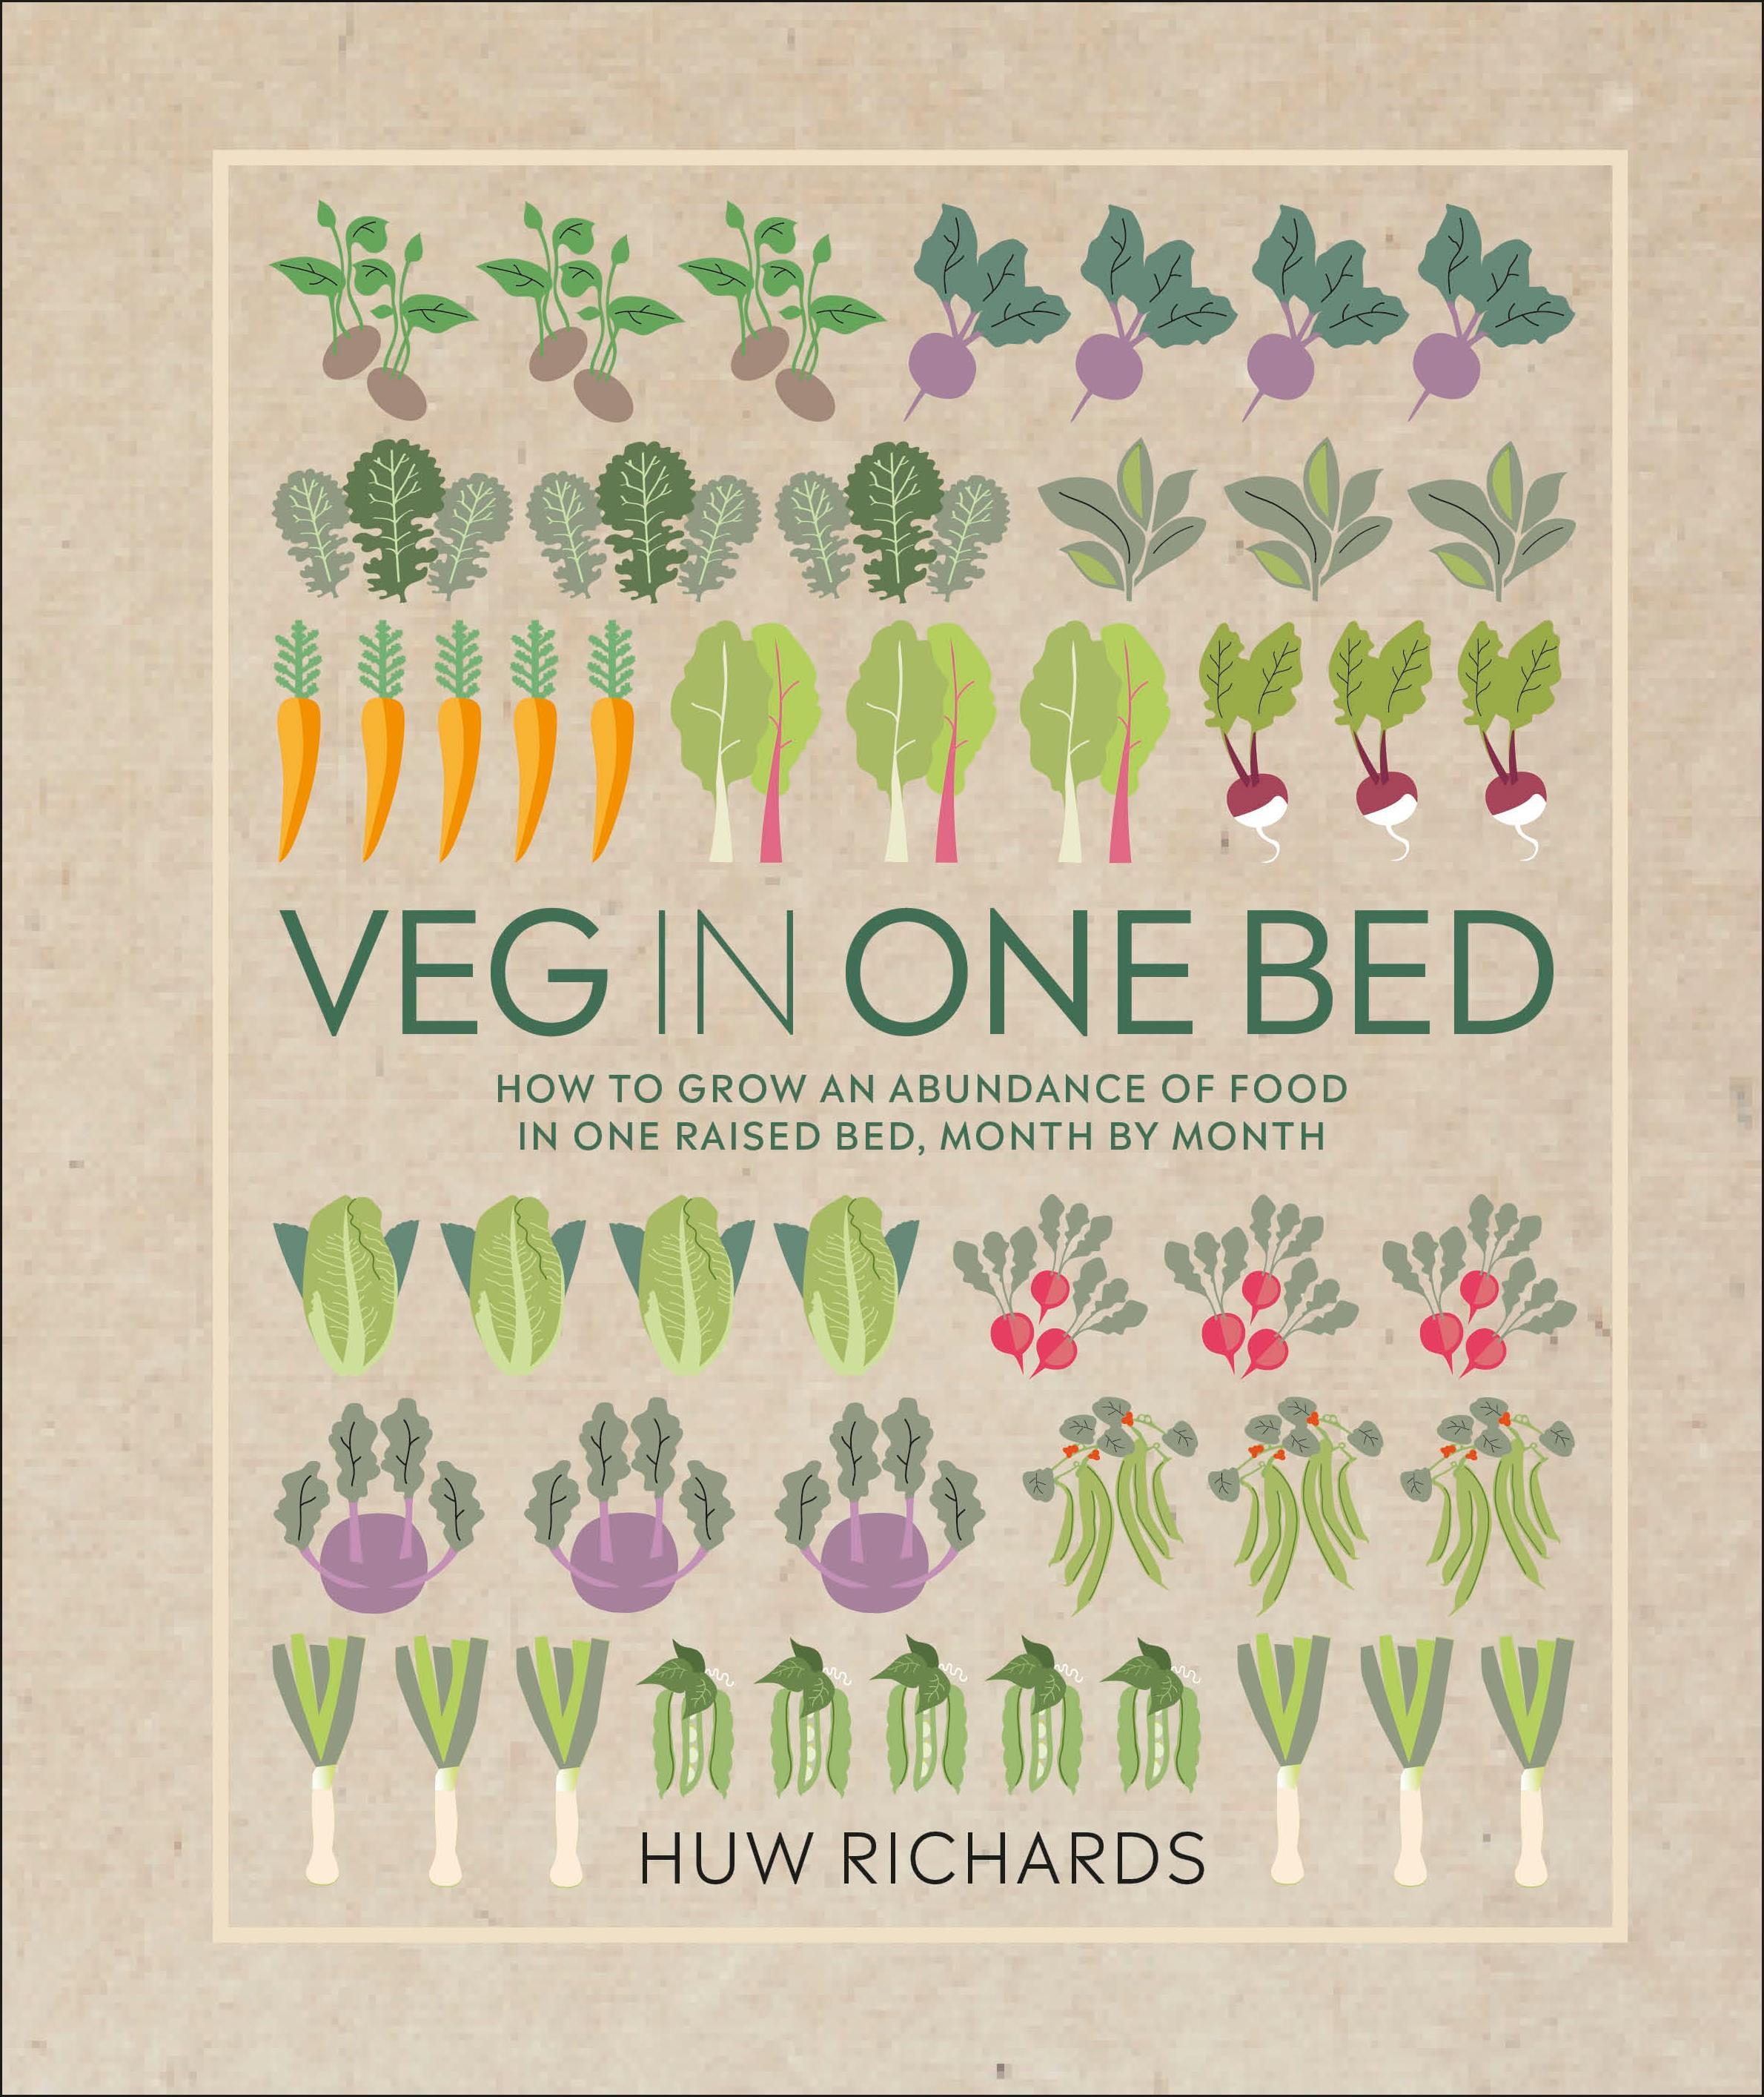 Veg in One Bed: How to Grow an Abundance of Food in One Raised B